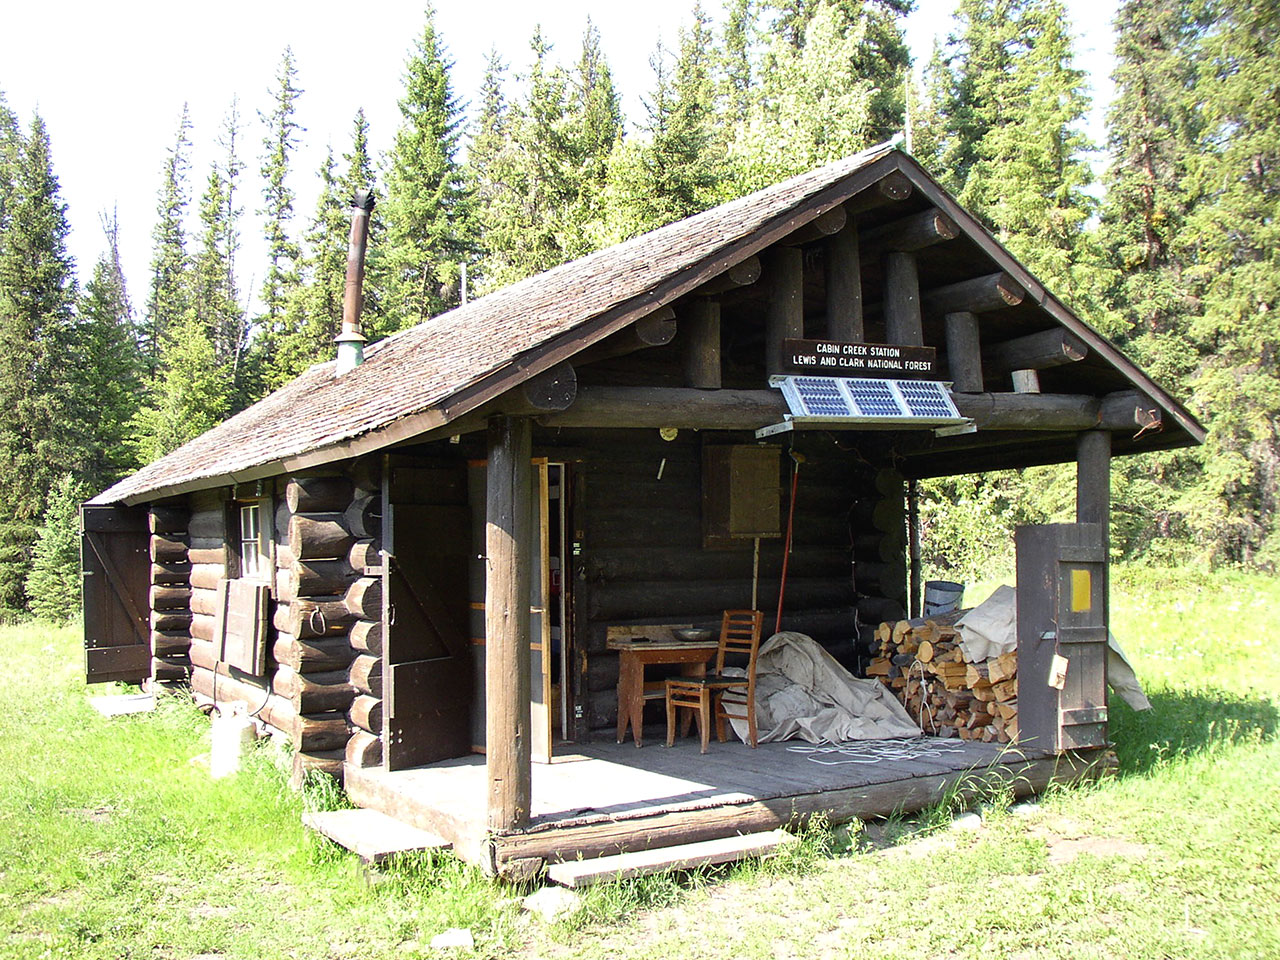 Administrative cabin in the Bob Marshall Wilderness